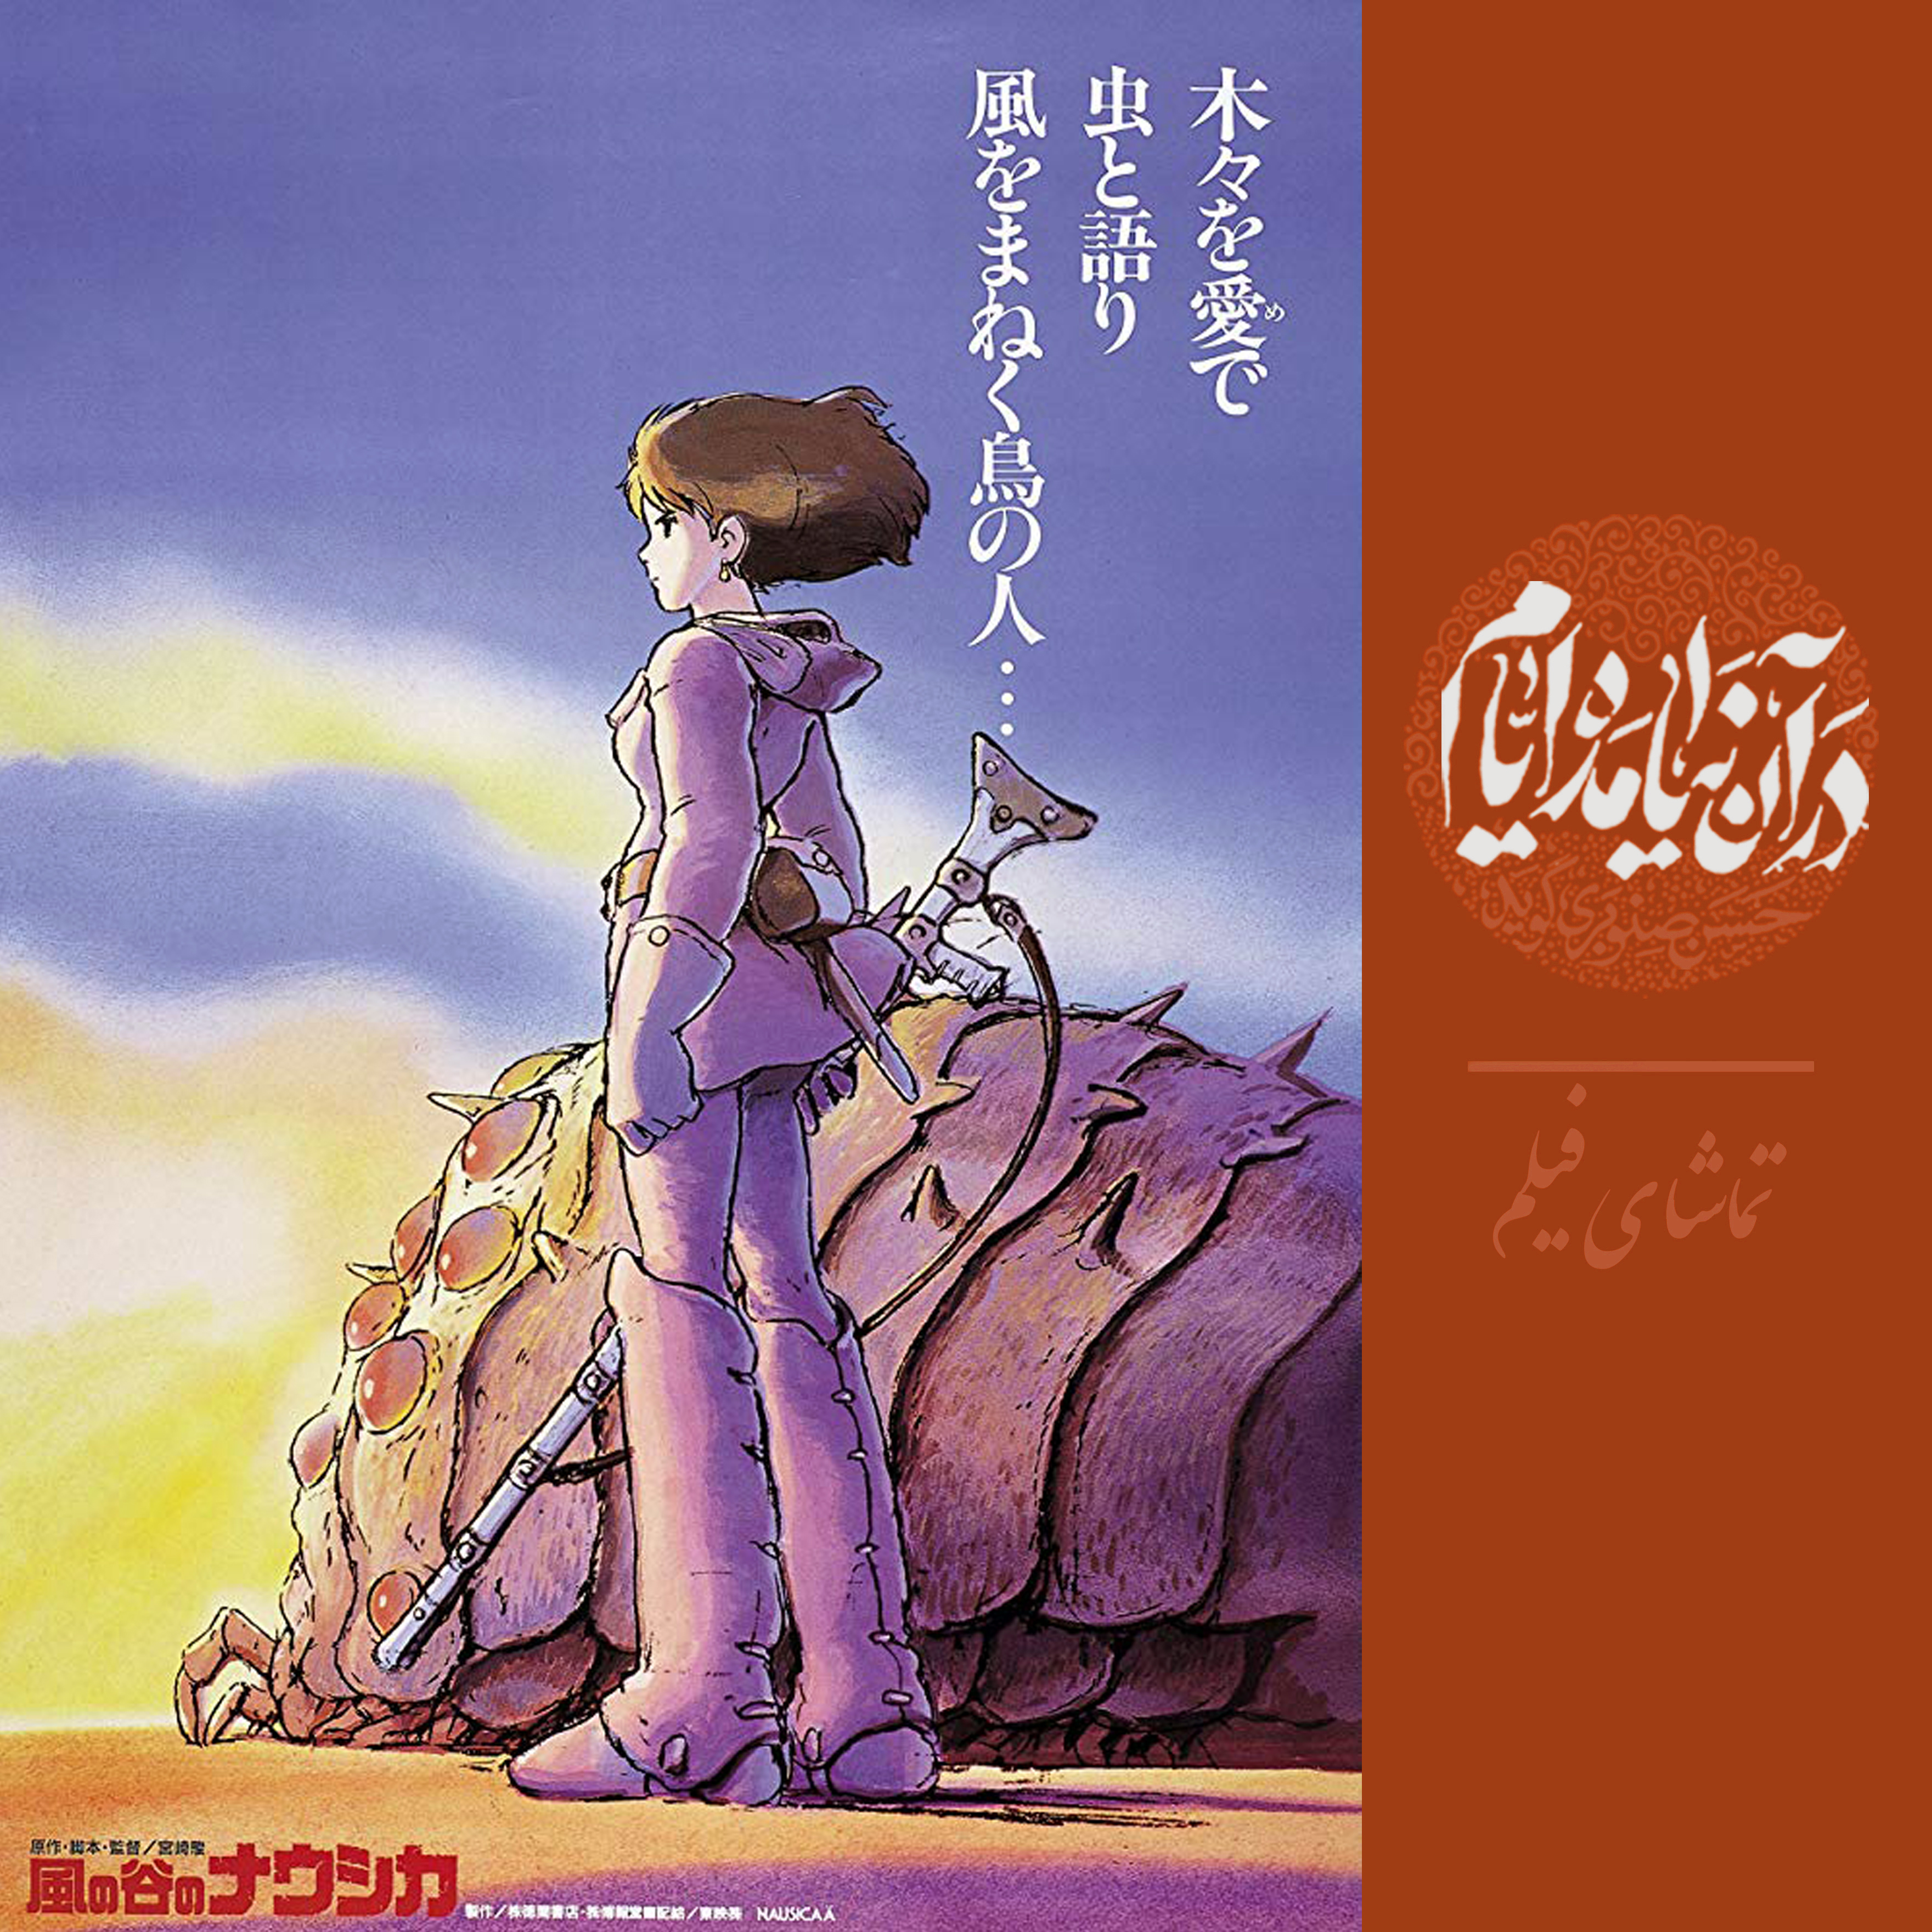 http://bayanbox.ir/view/9202113075221987564/a3-Nausicaa-of-the-Valley-of-the-Wind.jpg